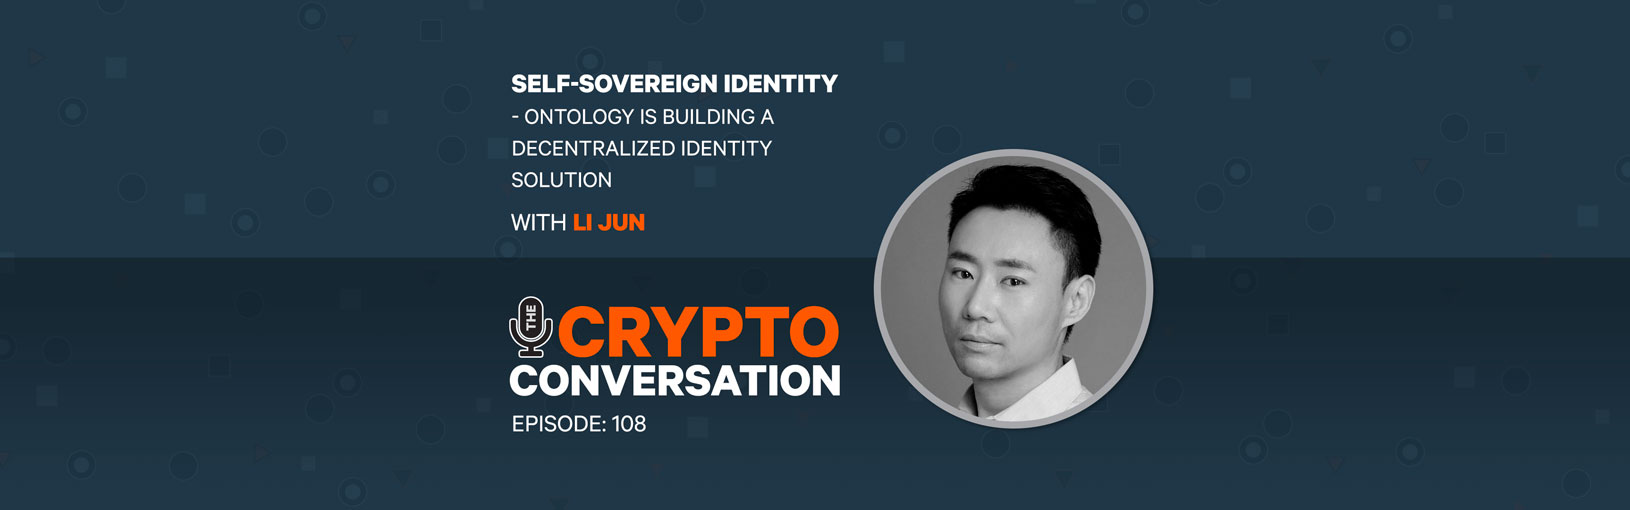 Self-Sovereign – Ontology is building a decentralized identity solution